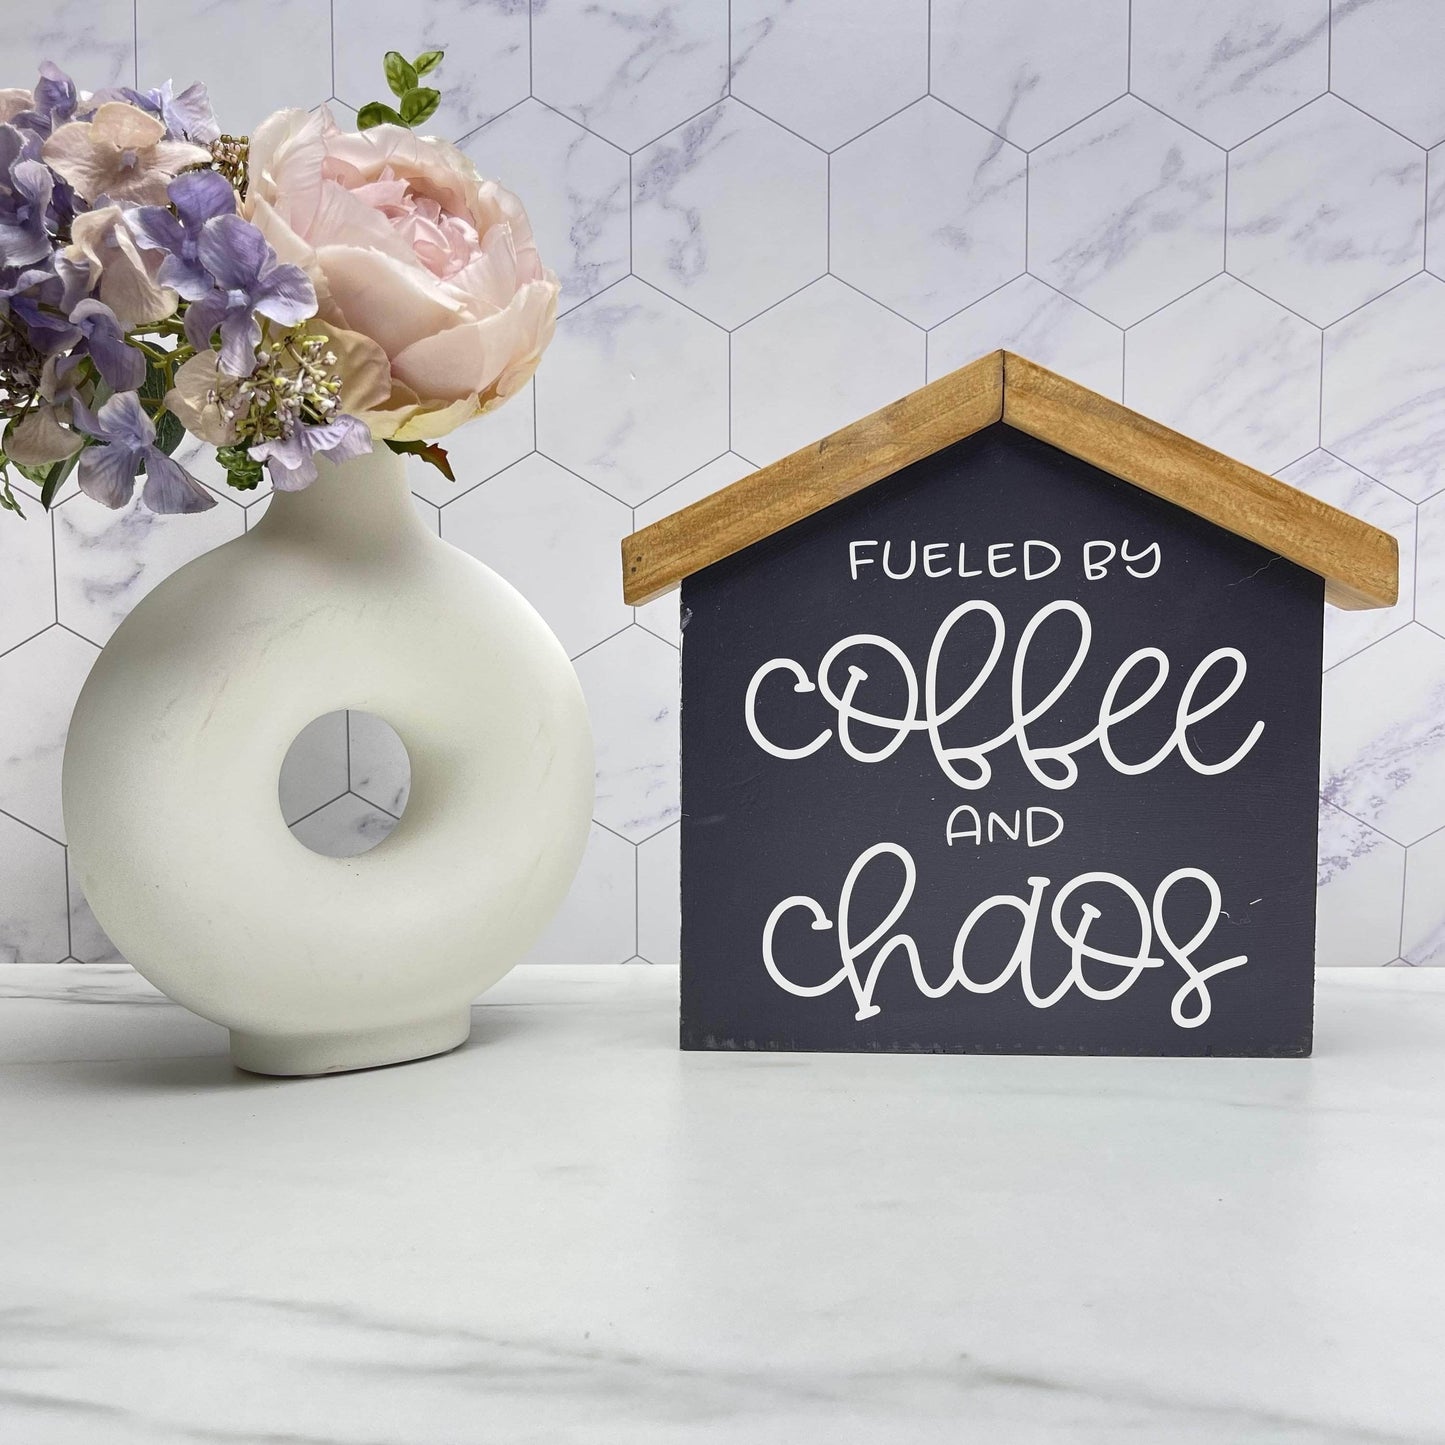 Fuelled by Coffee and Chaos Kitchen house wood sign decor